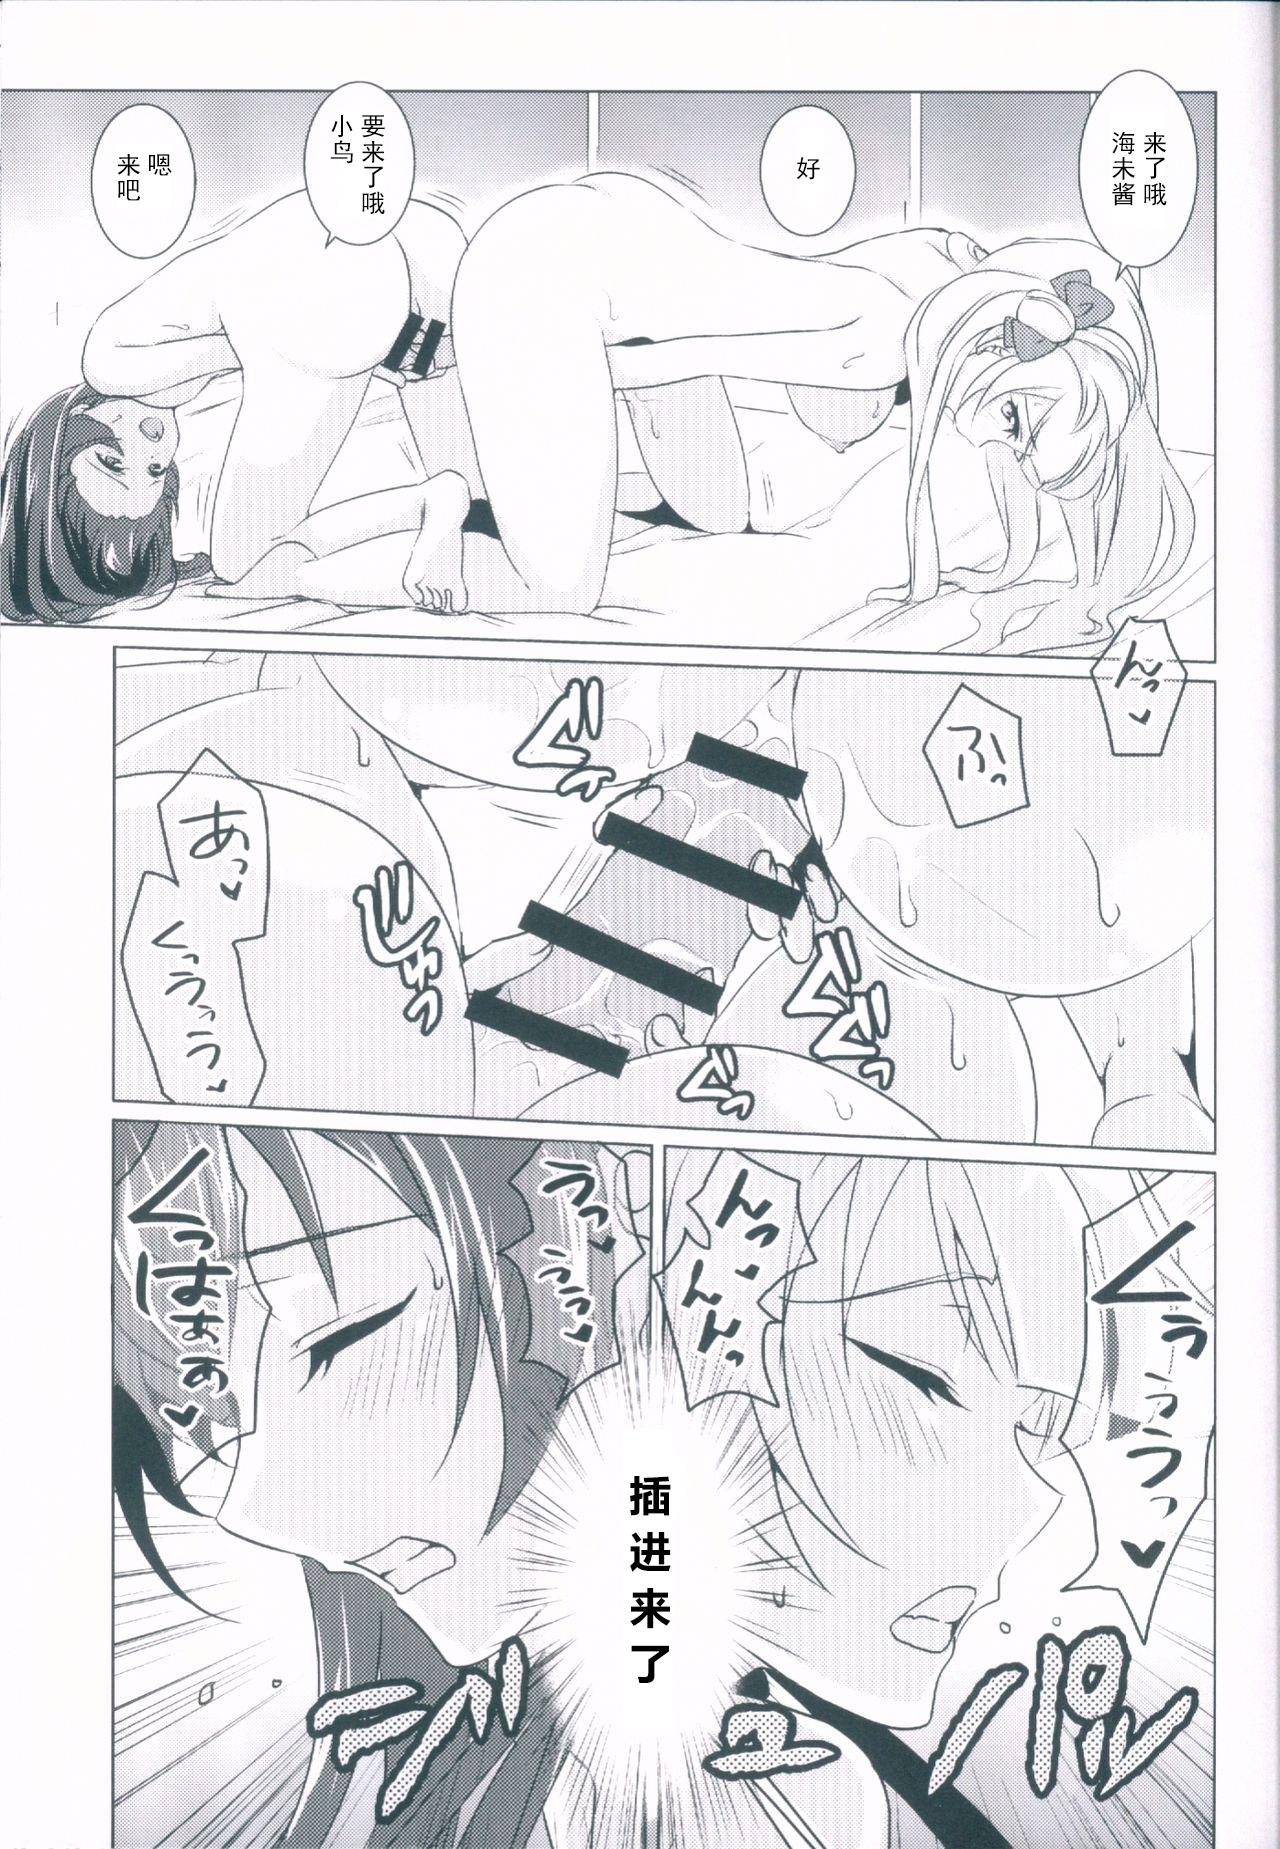 Young Tits honey*honey*days - Love live Chile - Page 12